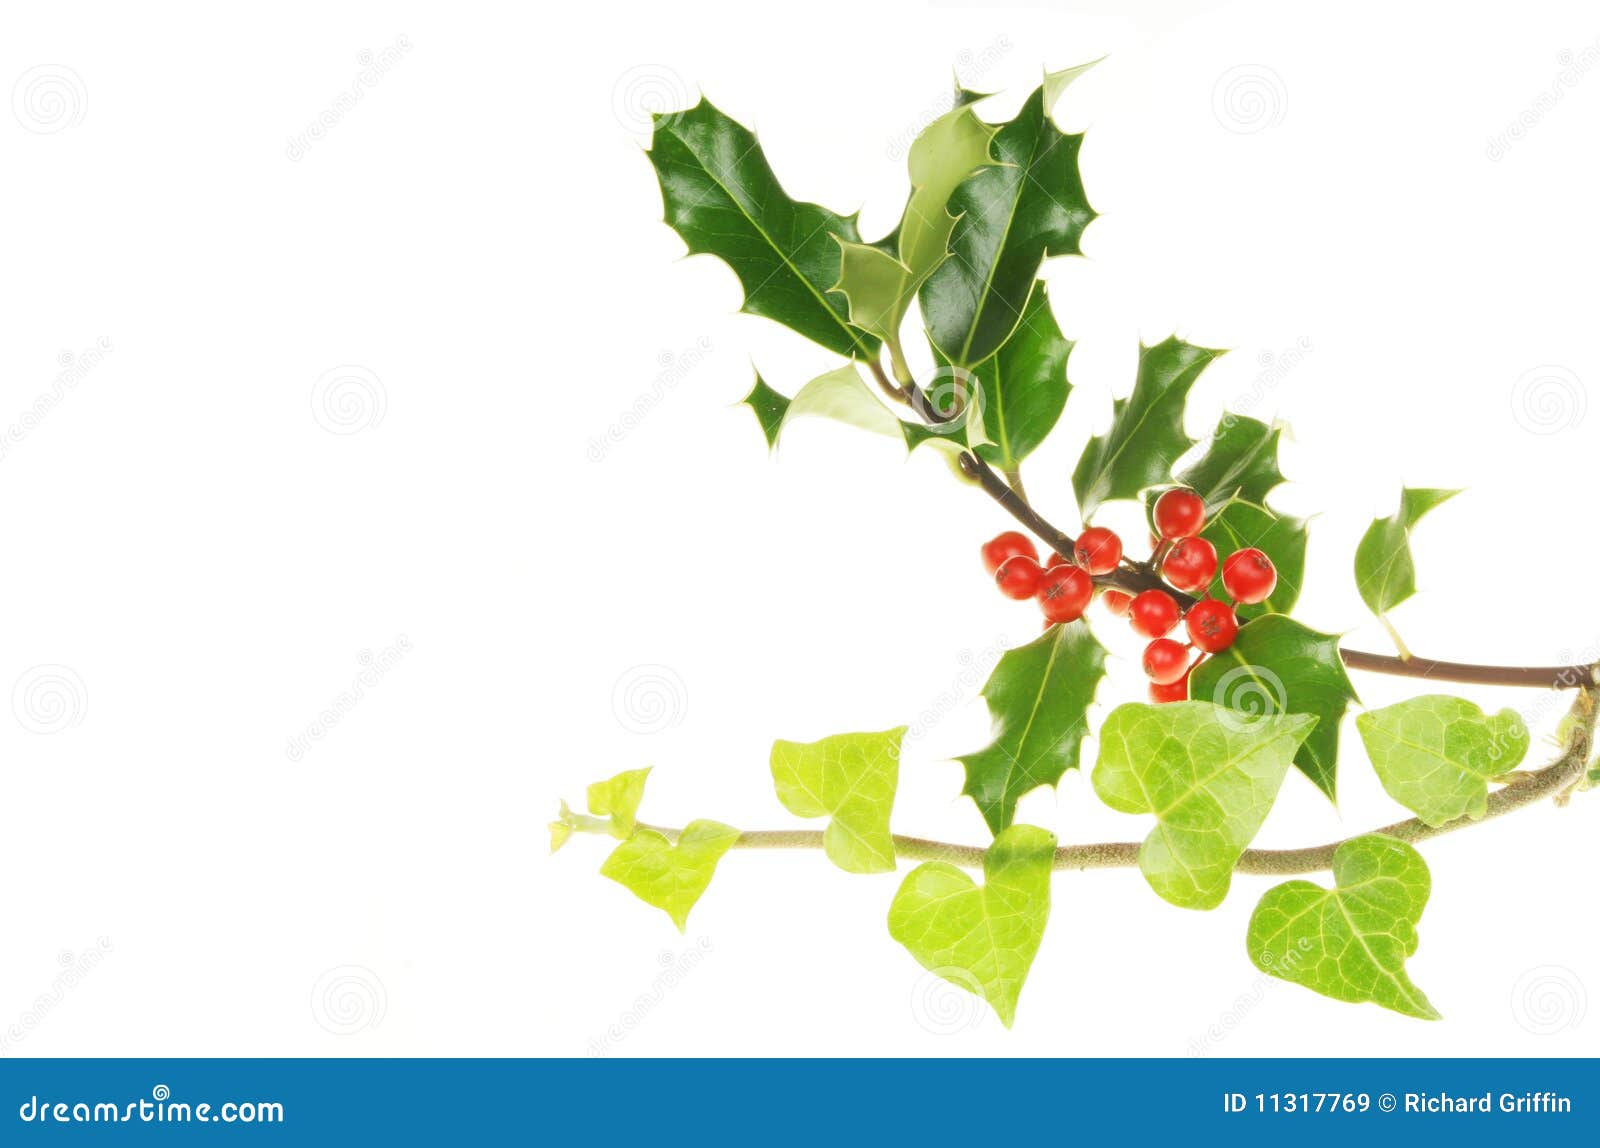 Holly And Ivy Royalty Free Stock Images - Image: 11317769